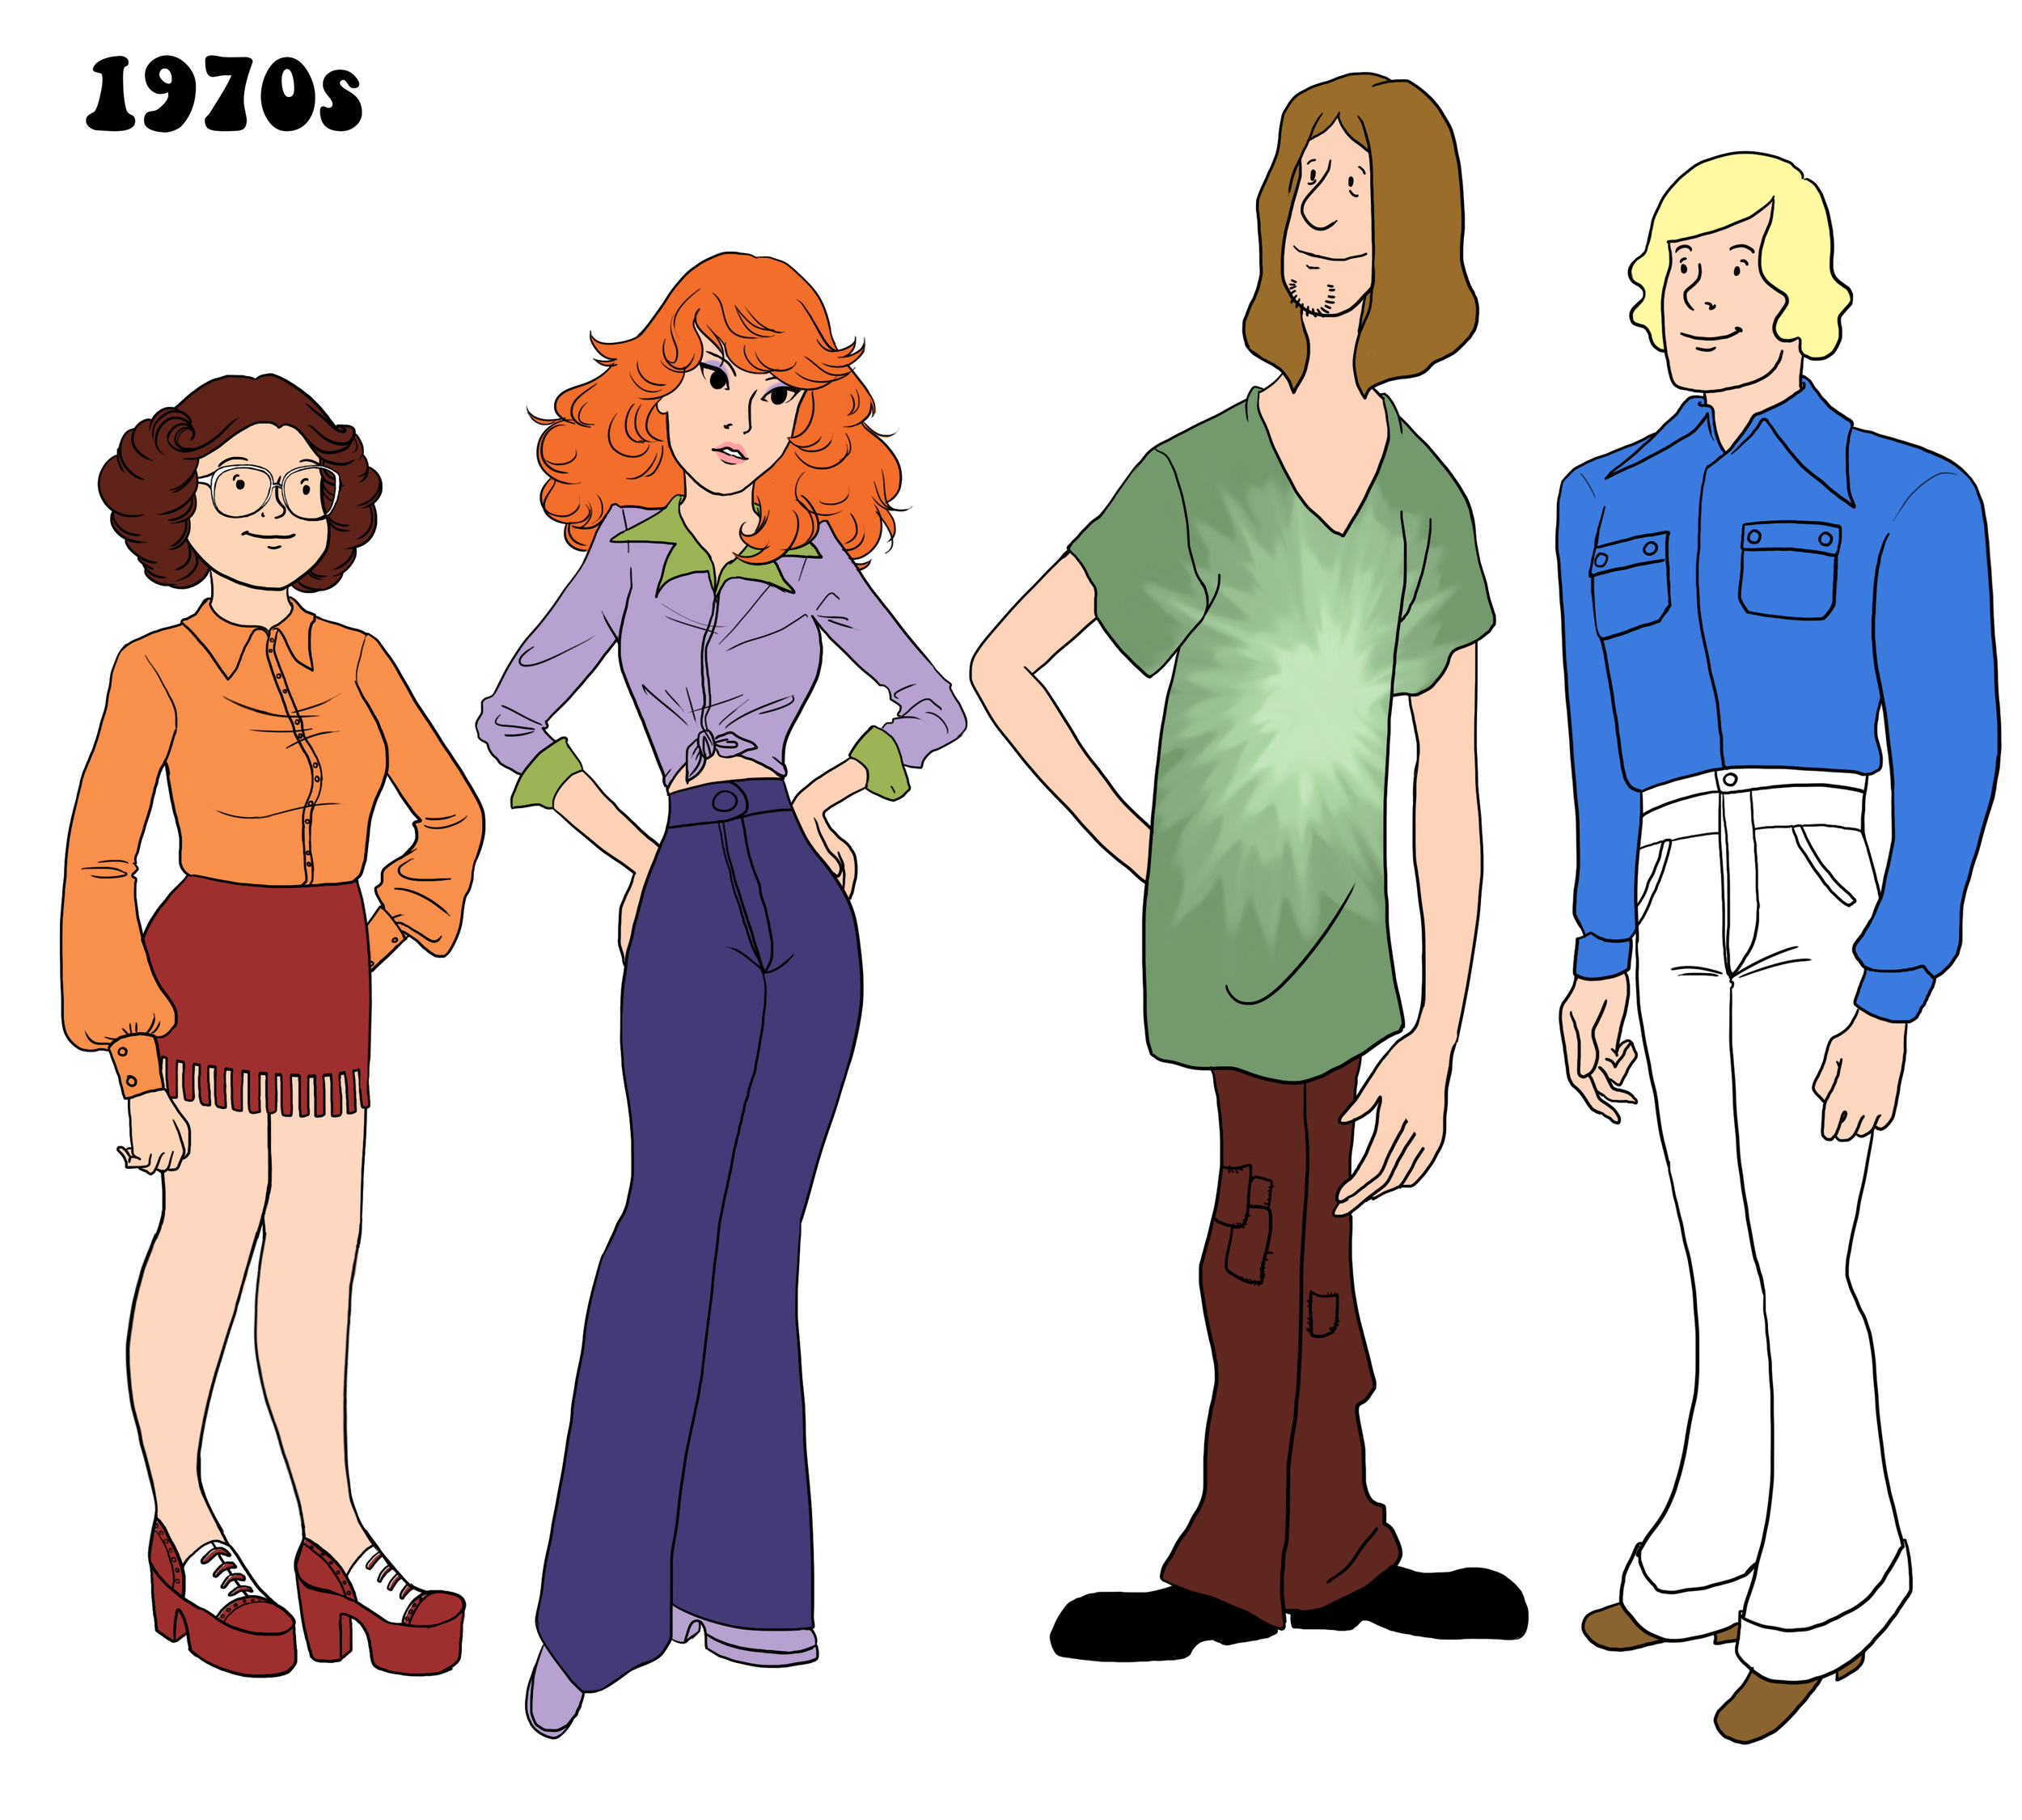 SCOOBY-DOO Gang Styled Through The Decades of The 20th Century.